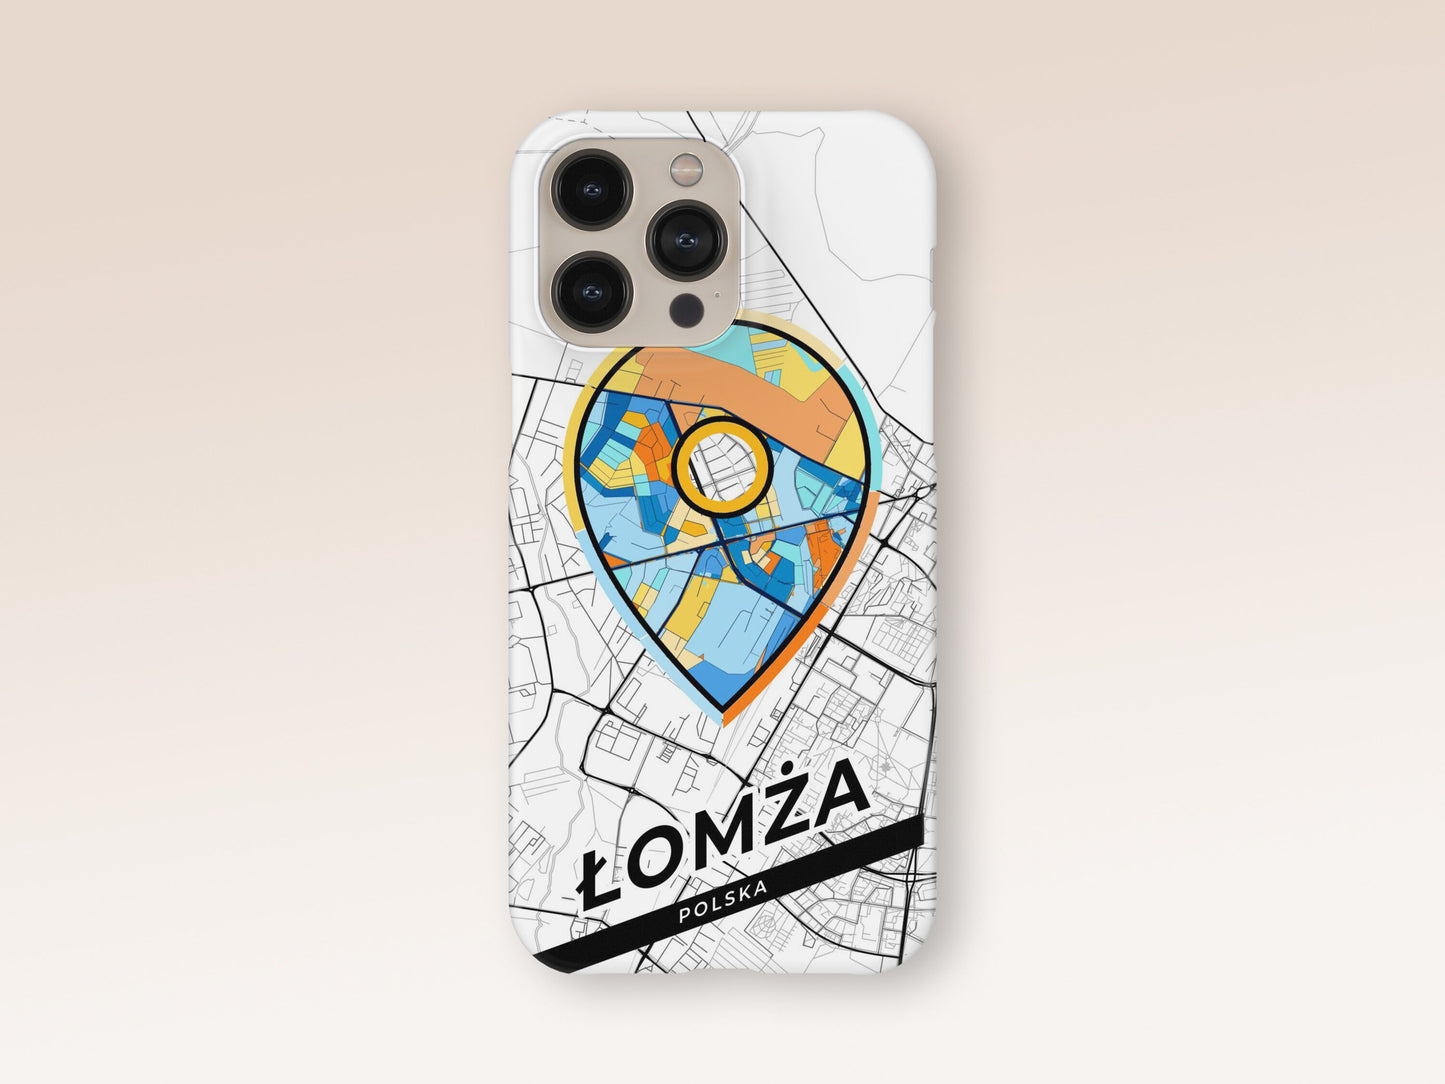 Łomża Poland slim phone case with colorful icon 1